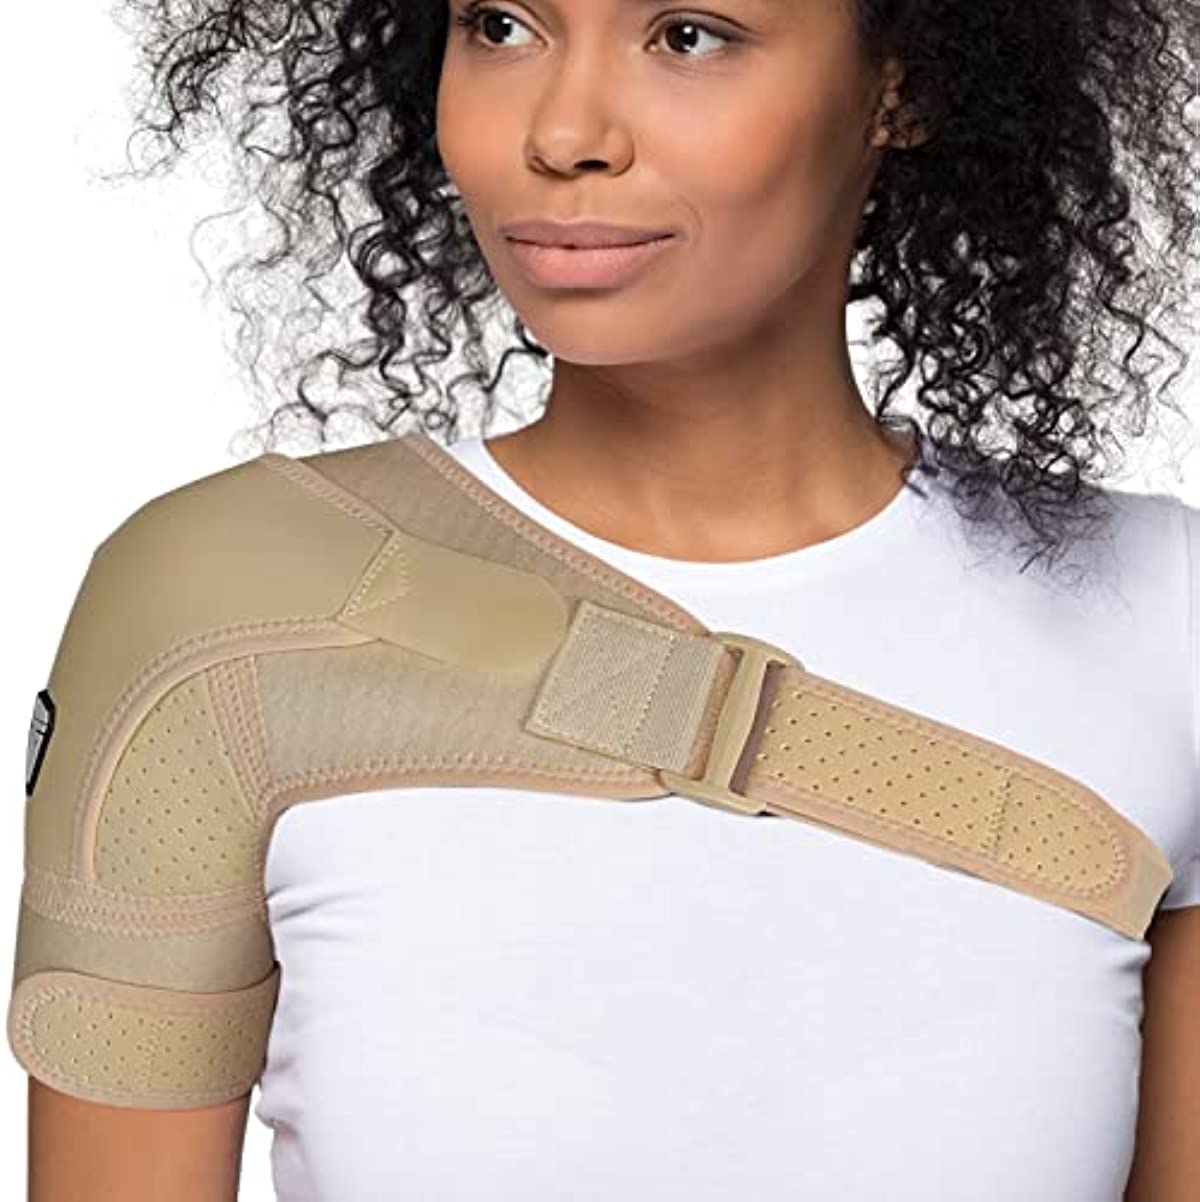 Shoulder Brace for Torn Rotator Cuff - 4 Sizes - Shoulder Pain Relief, Support and Compression - Sleeve Wrap for Shoulder Stability and Recovery - Fits Left and Right Arm, Men & Women (Nude, Small/Medium)